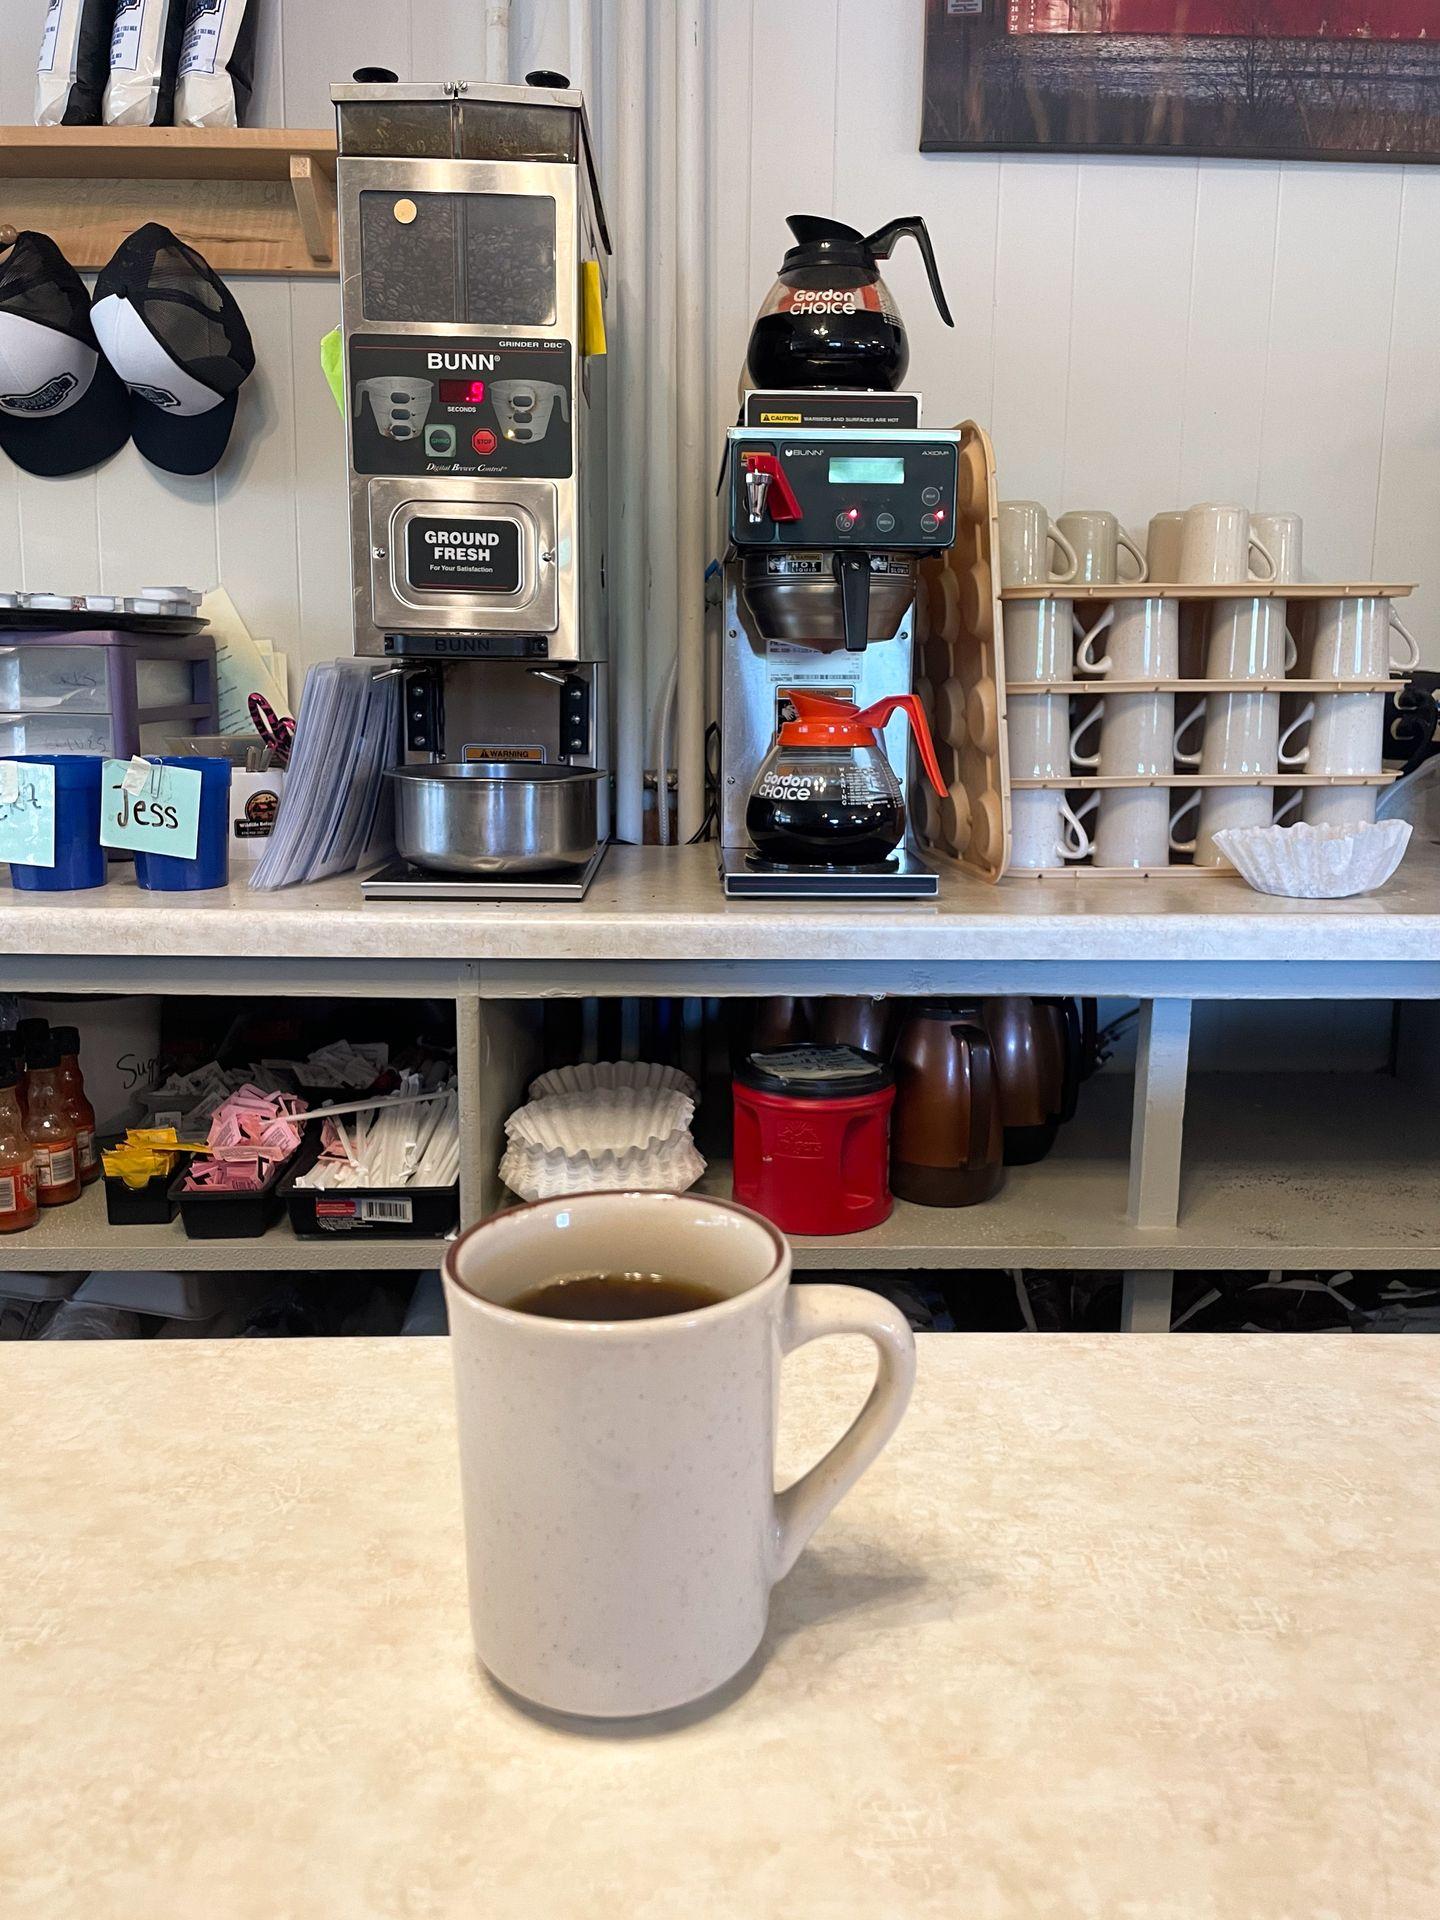 A cup of coffee sitting on a bar and a coffee machine behind the counter